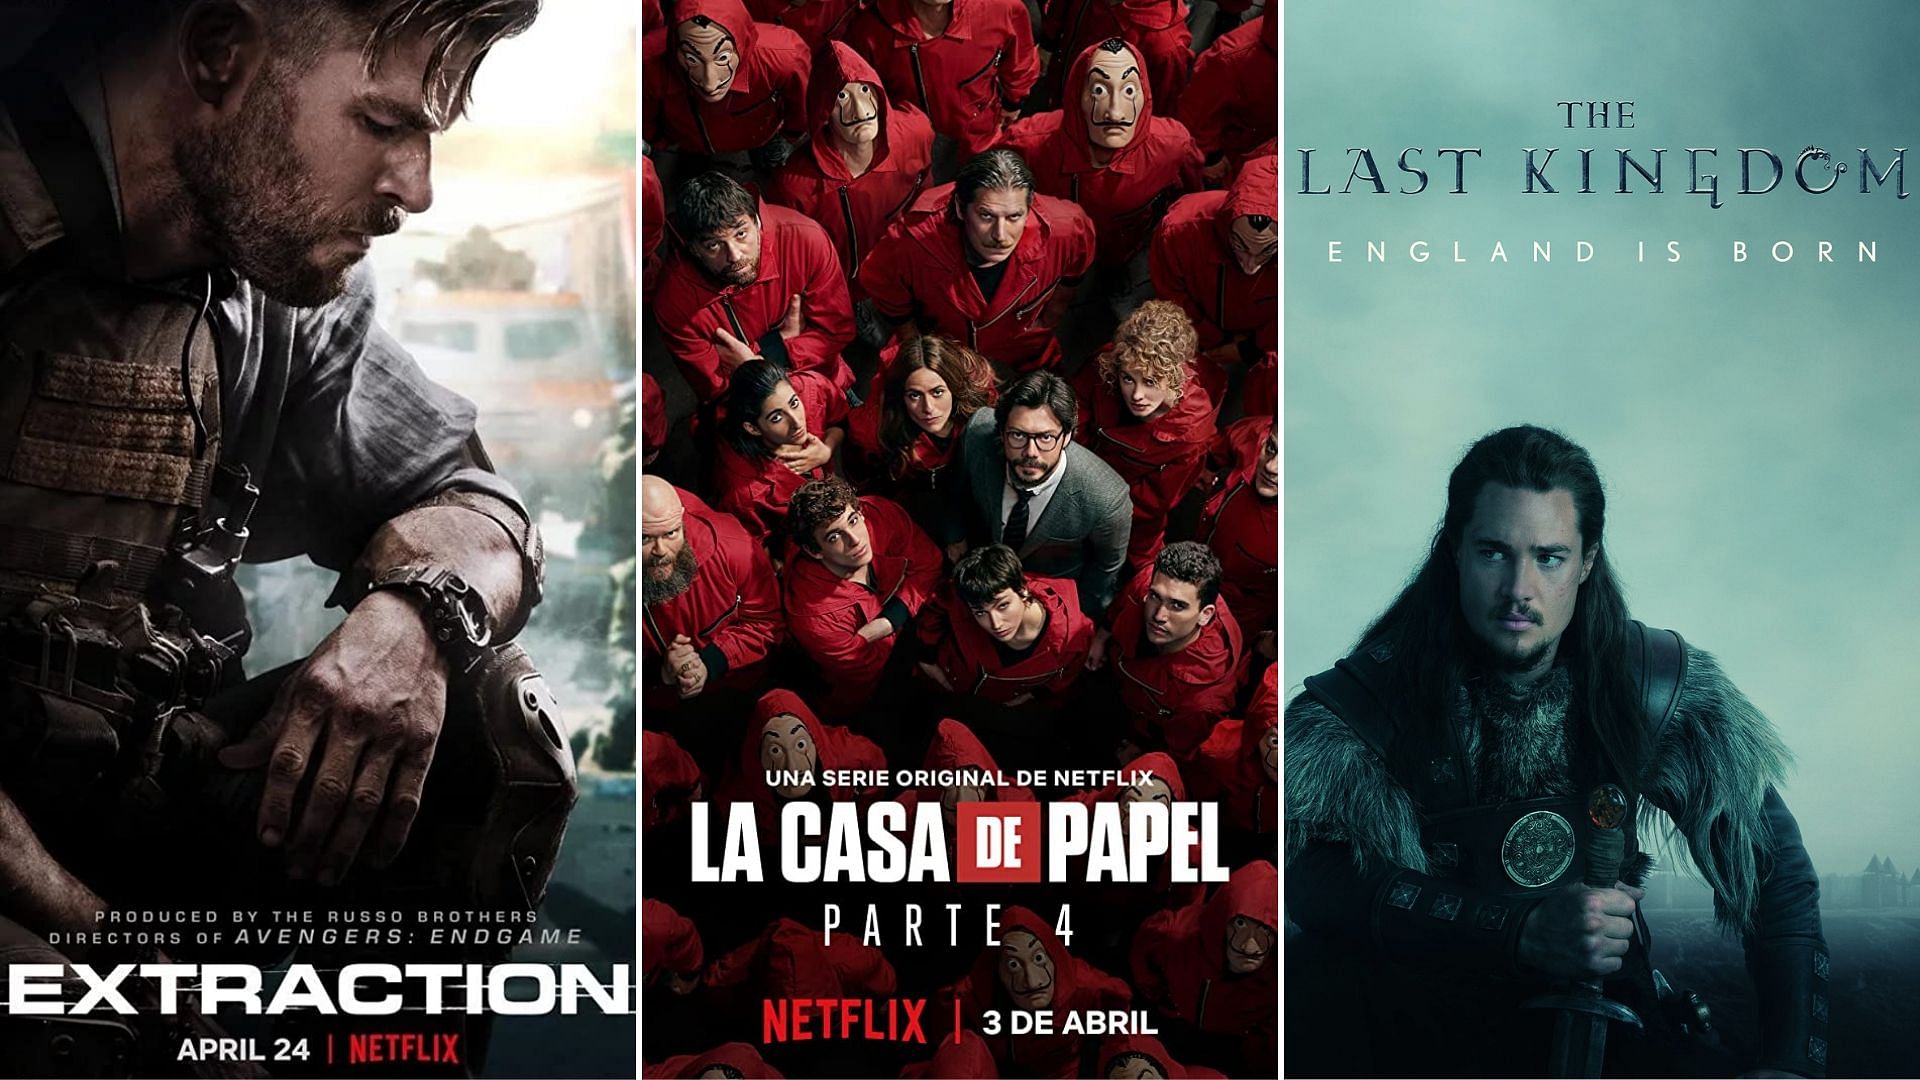 Official Posters of Extraction, Money Heist Part 4 and The Last Kingdom.